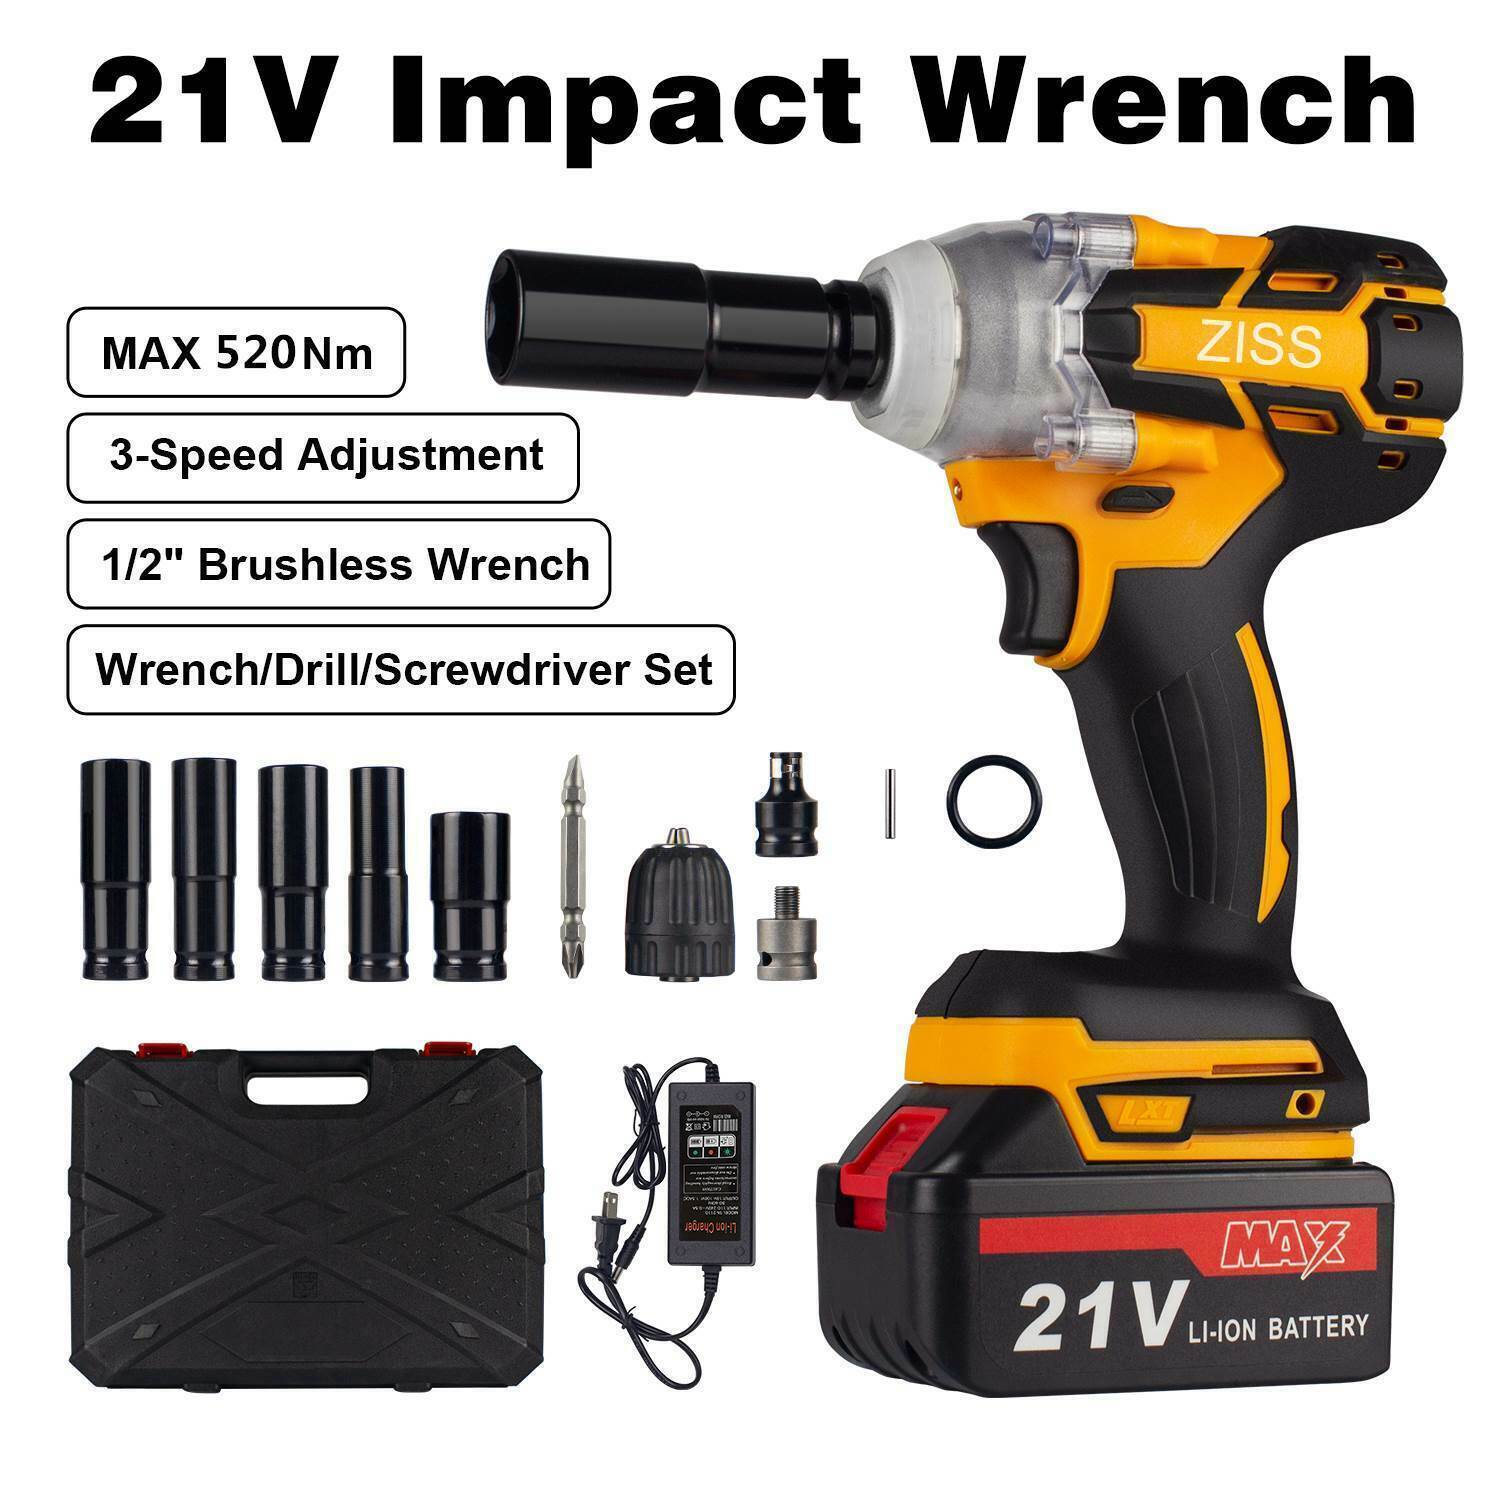 21V Cordless Impact Wrench Kit 1/2" 520Nm High Torque Brushless Drill w/ Battery Ziss Z43046